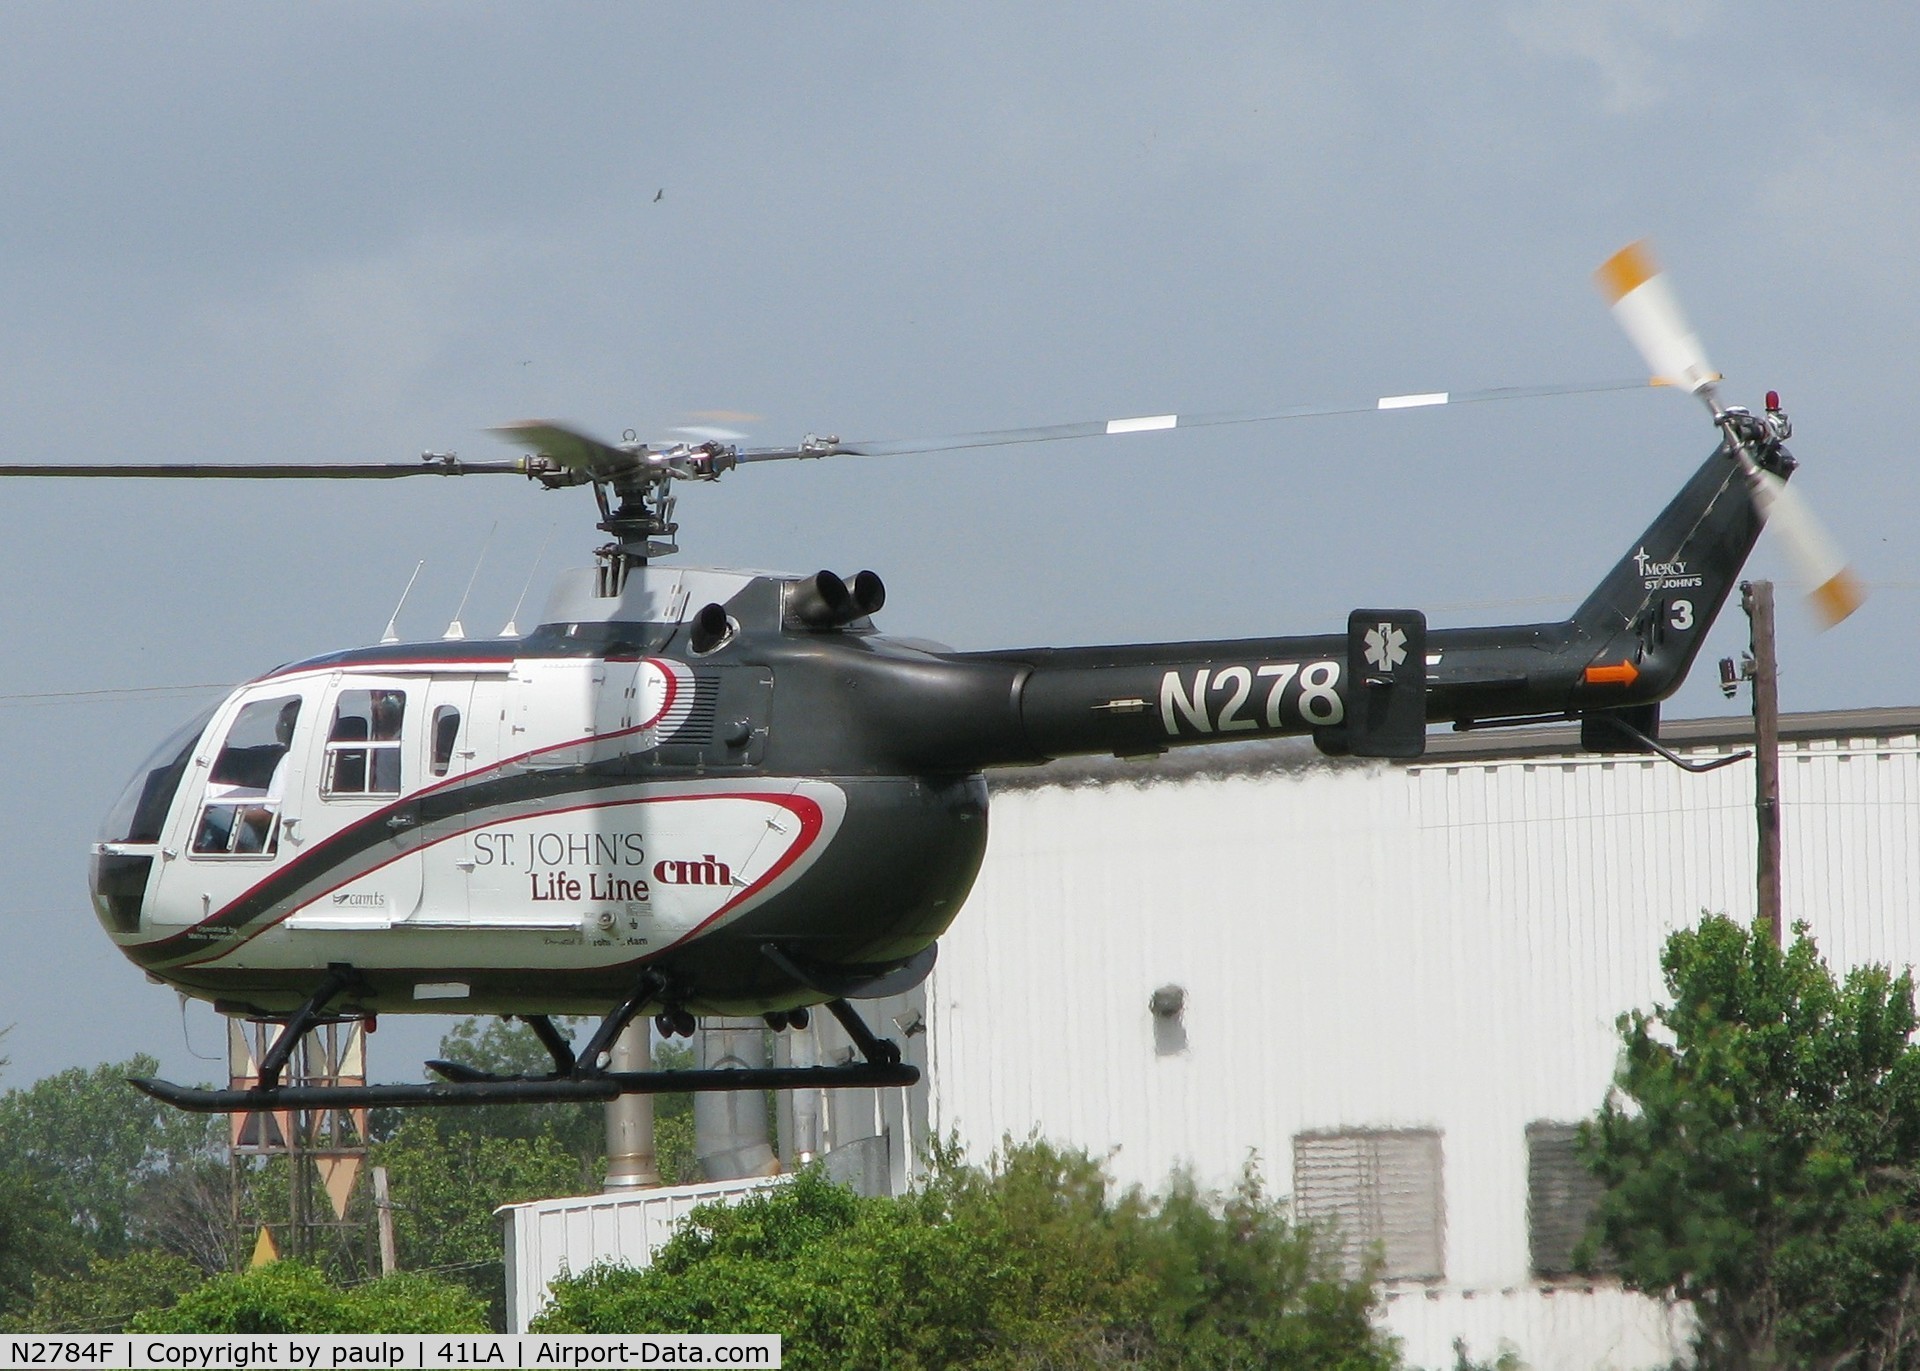 N2784F, 1983 MBB Bo-105S C/N S-621, Taking off from Metro Aviation near the Downtown Shreveport airport.